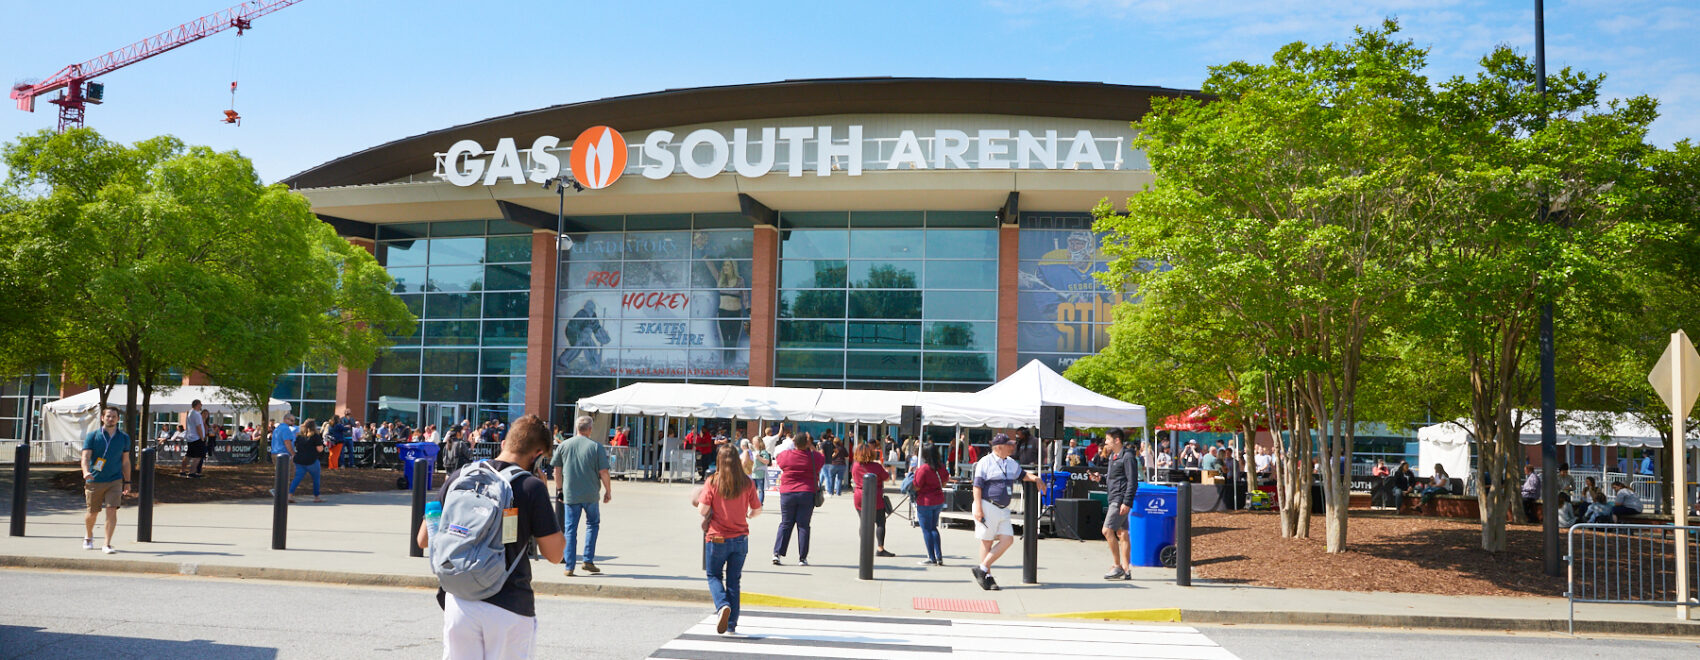 Active Entertainment District at the Gas South Arena in Sugarloaf CID